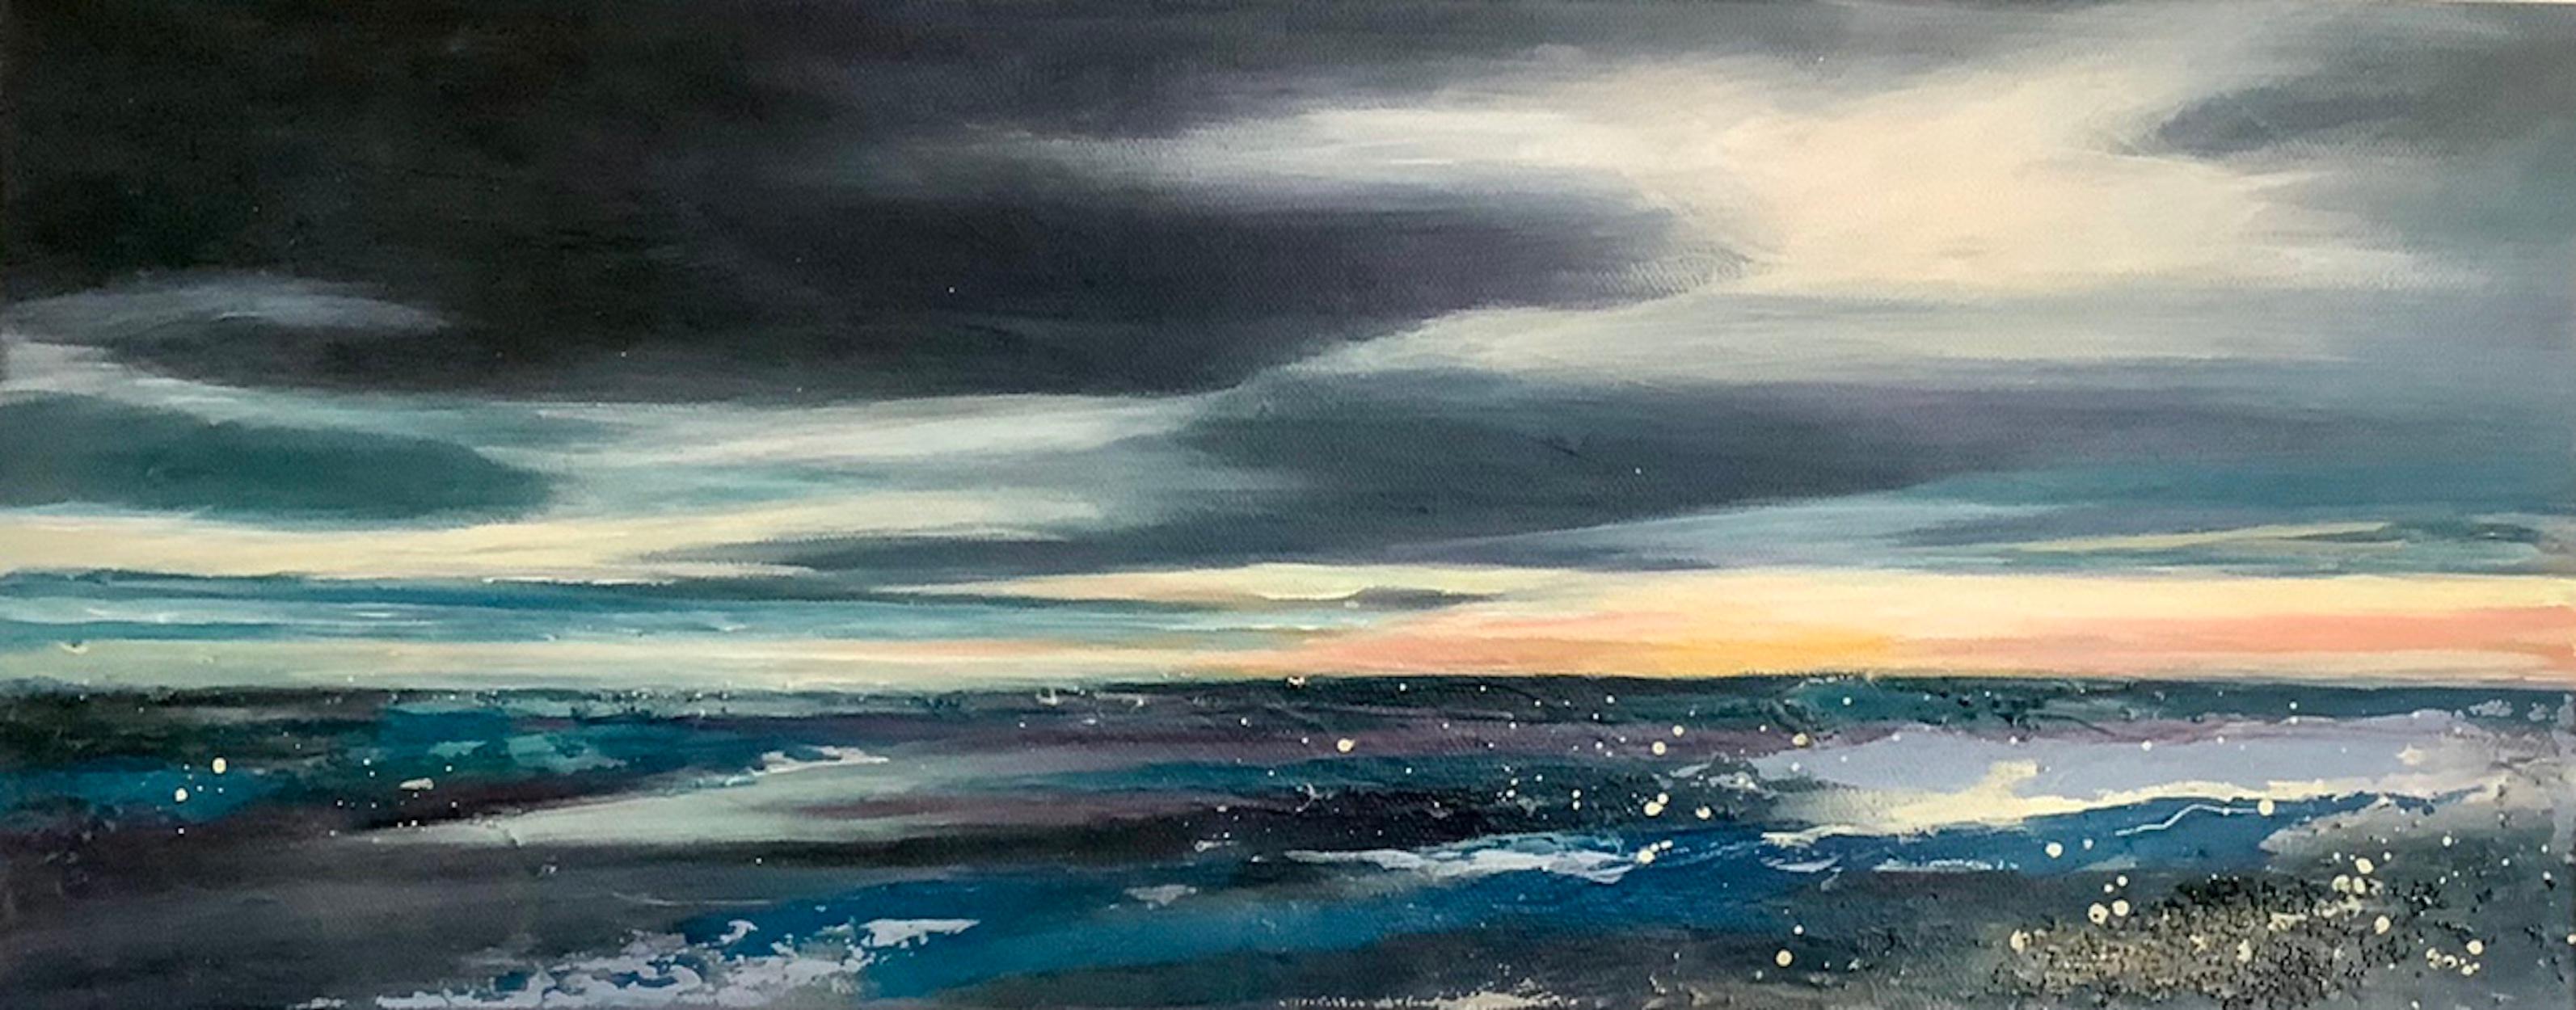 The Last Light by Adele Riley, Original seascape painting, Contemporary art